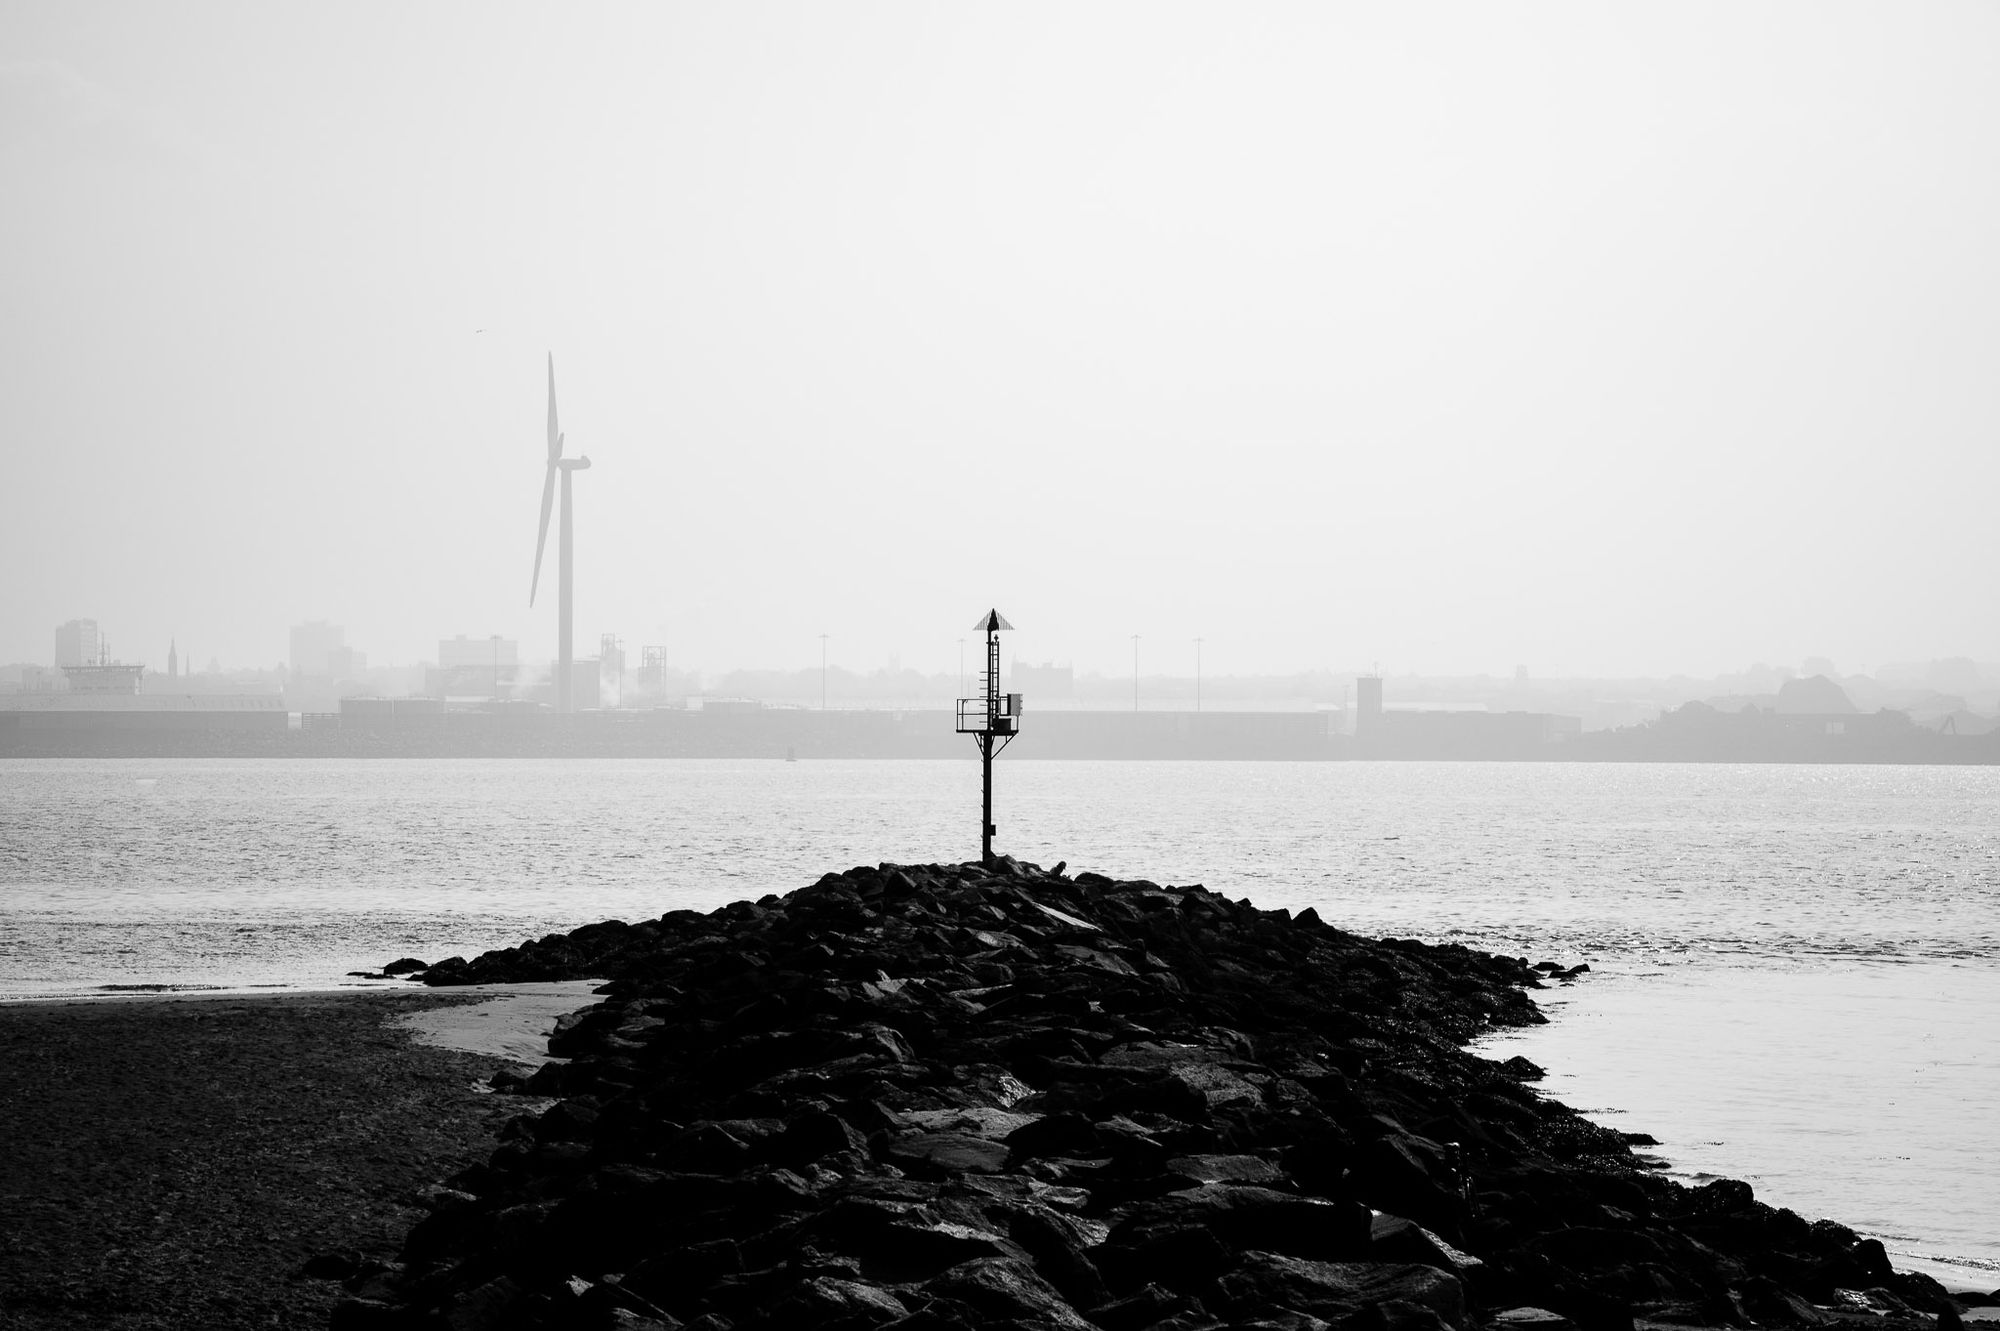 A groyne extending out into the river Mersey on a hazy day.